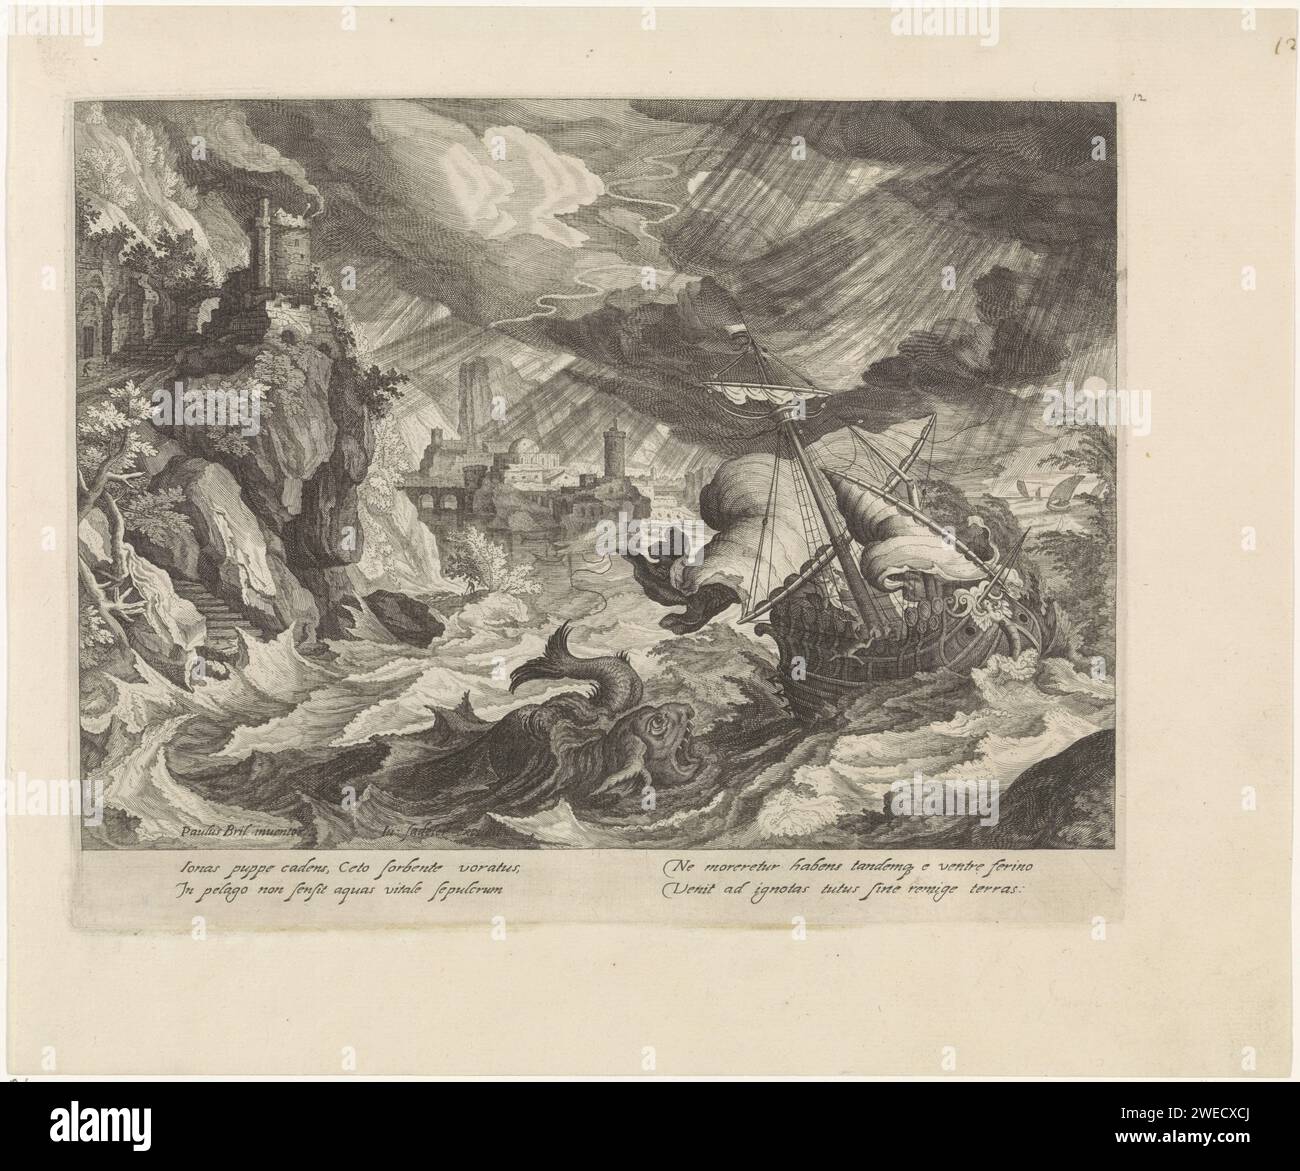 Jonah is thrown overboard by the fishermen, Justus Sadeler (Possible), After Paul Bril, 1600 - 1620 print A coastal landscape with a heavy storm. In the foreground a boat with Jonah thrown overboard by the fishermen. A sea monster swims next to the boat and is about to swallow Jonah. The print has a Latin caption with the story of Jonah. Venice (possibly) paper engraving the sailors reluctantly throw the prophet Jonah into the sea. coast Stock Photo